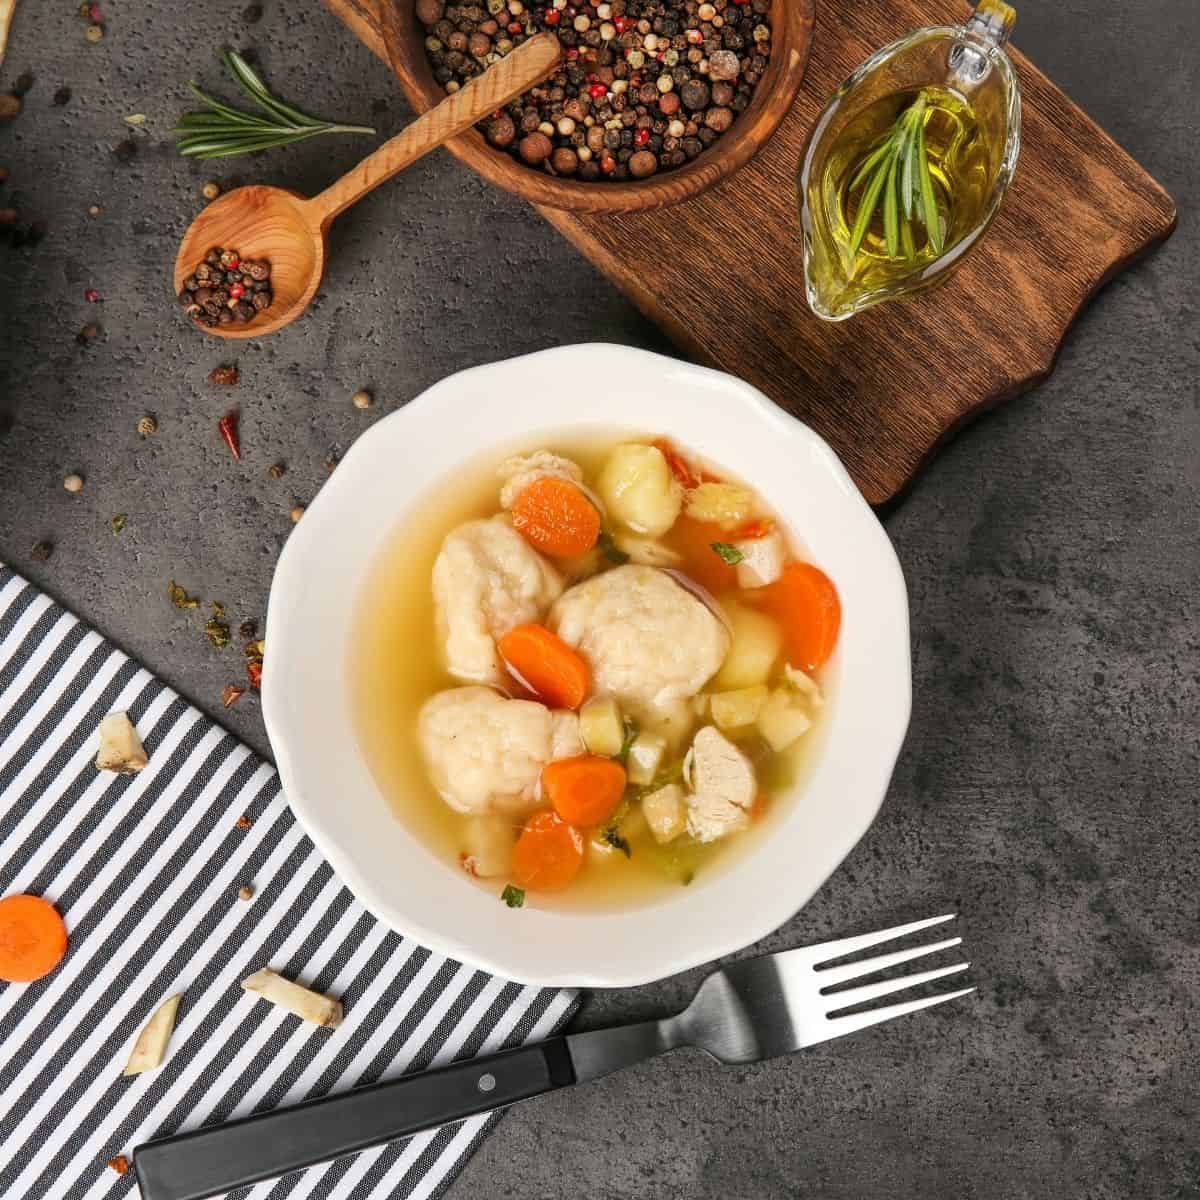 What To Serve With Chicken And Dumplings: 15 Simple Sides